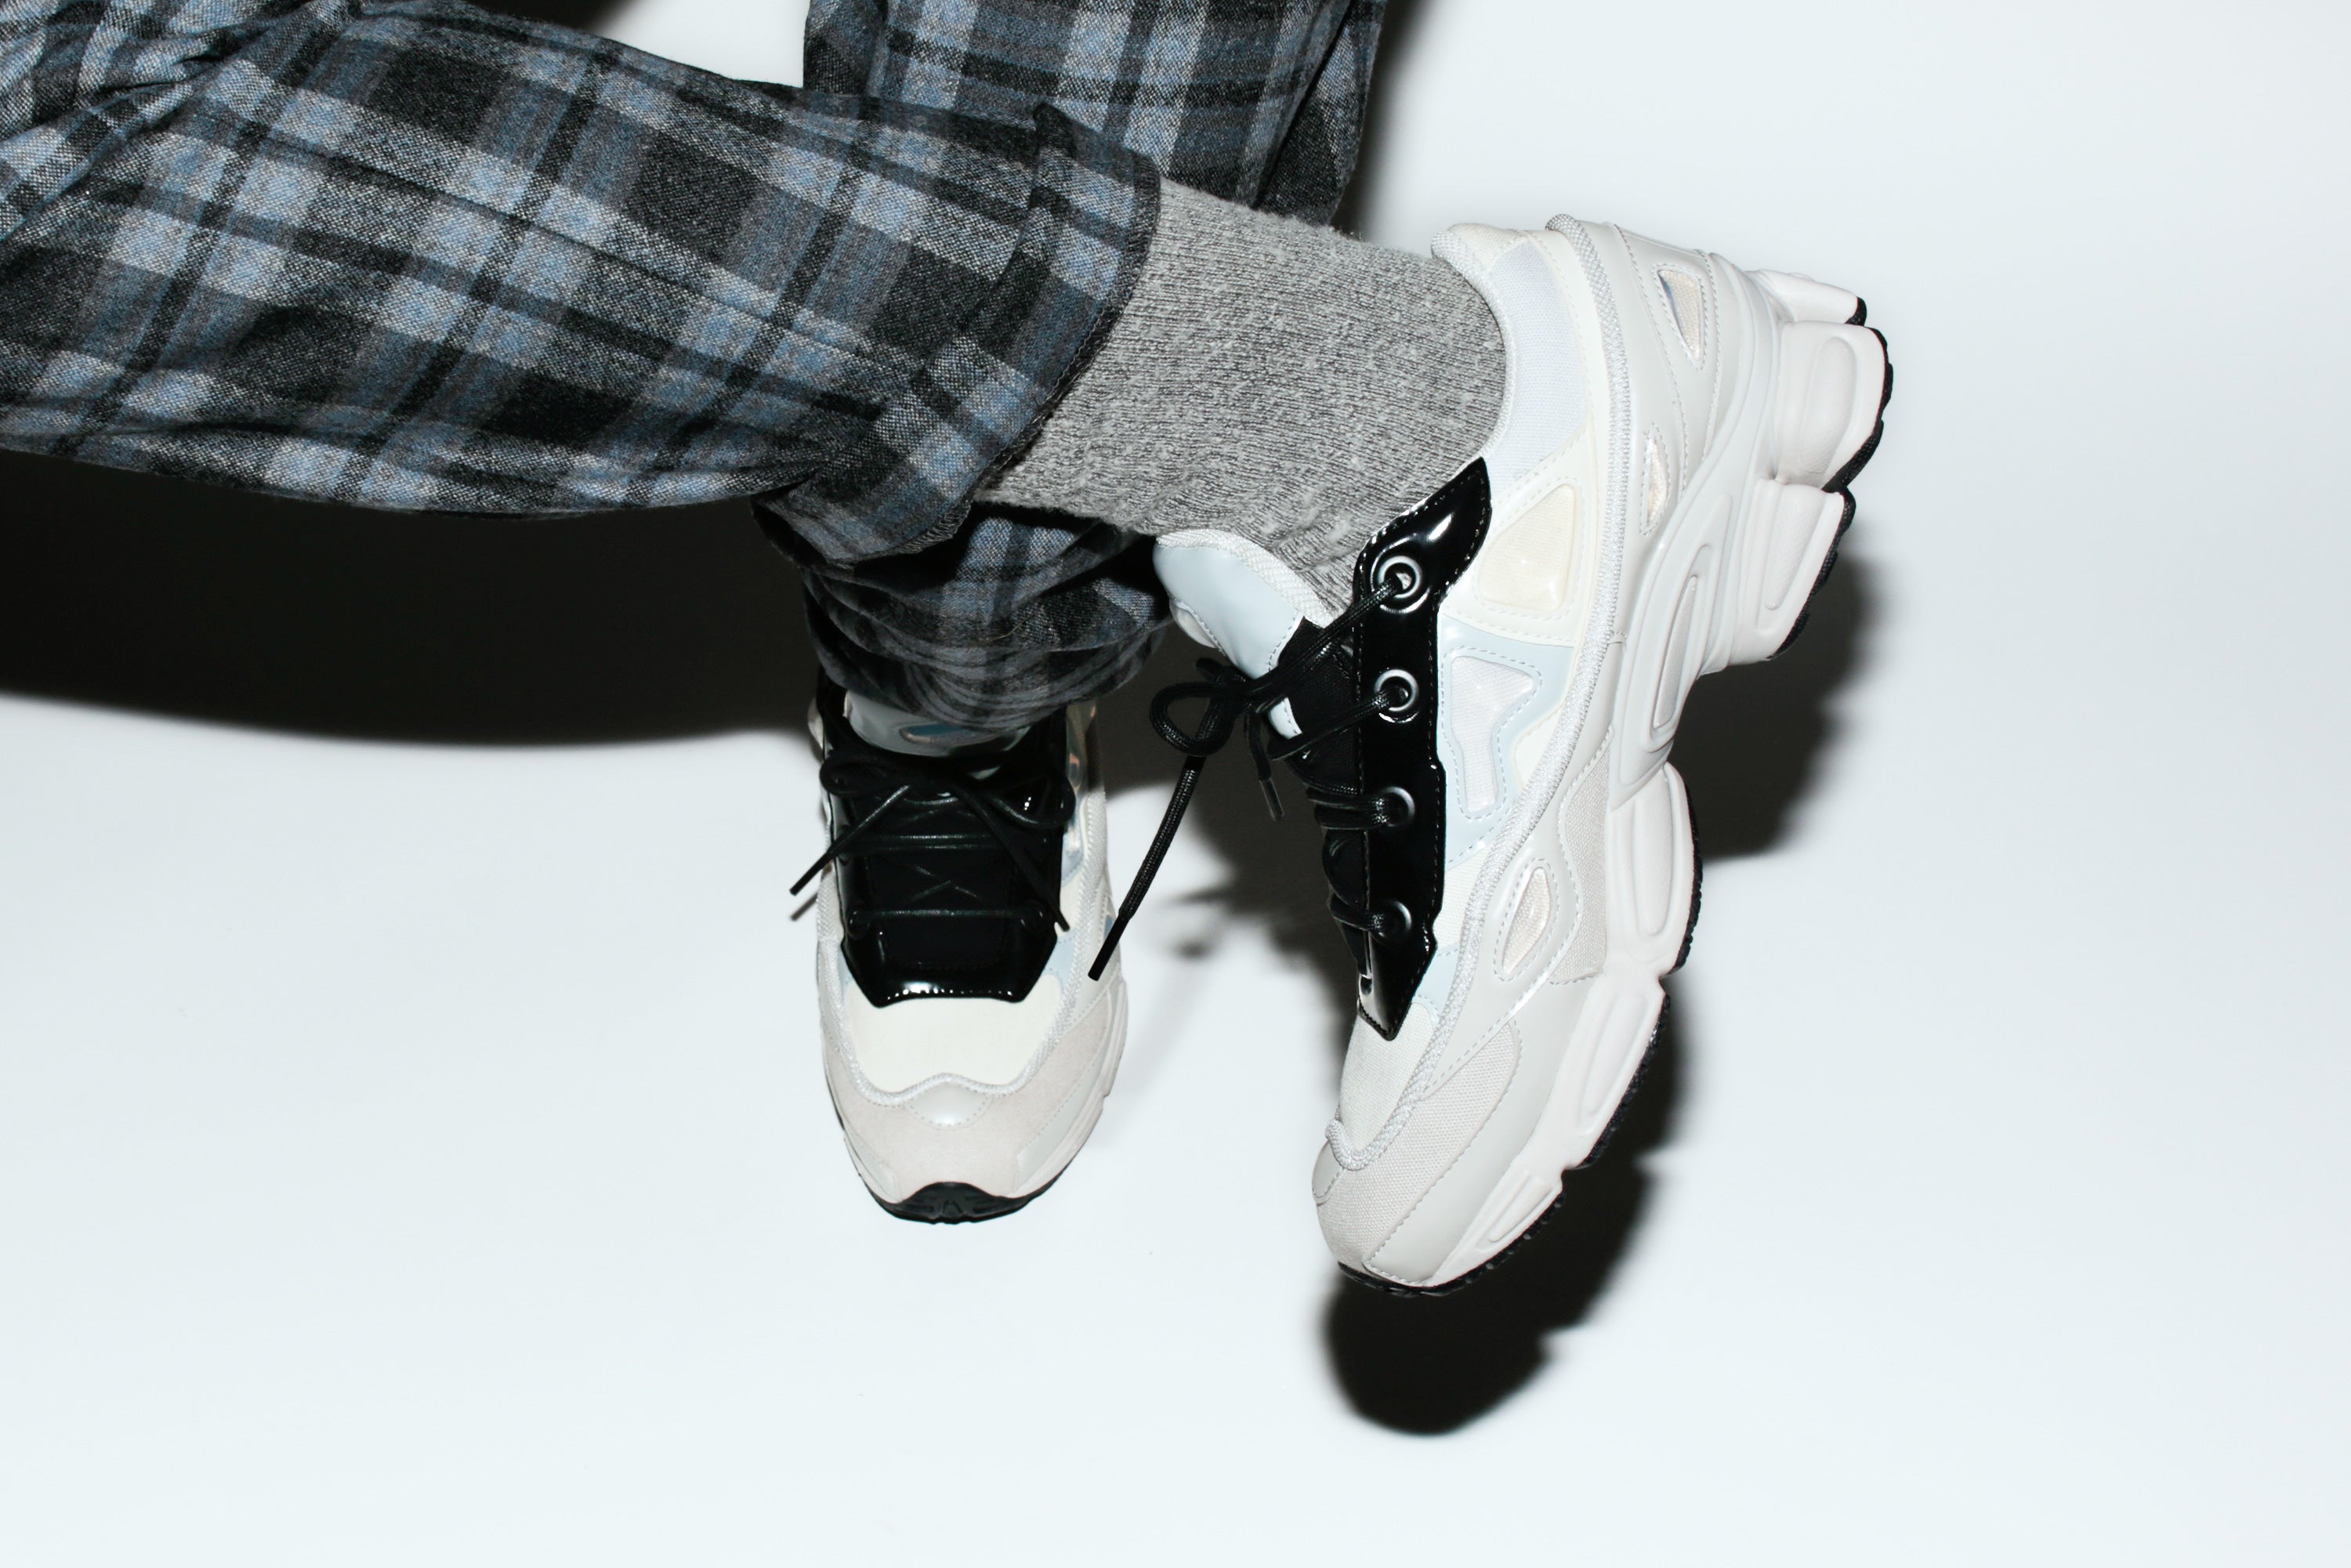 Adidas by RAF SIMONS - SS18 Footwear article image